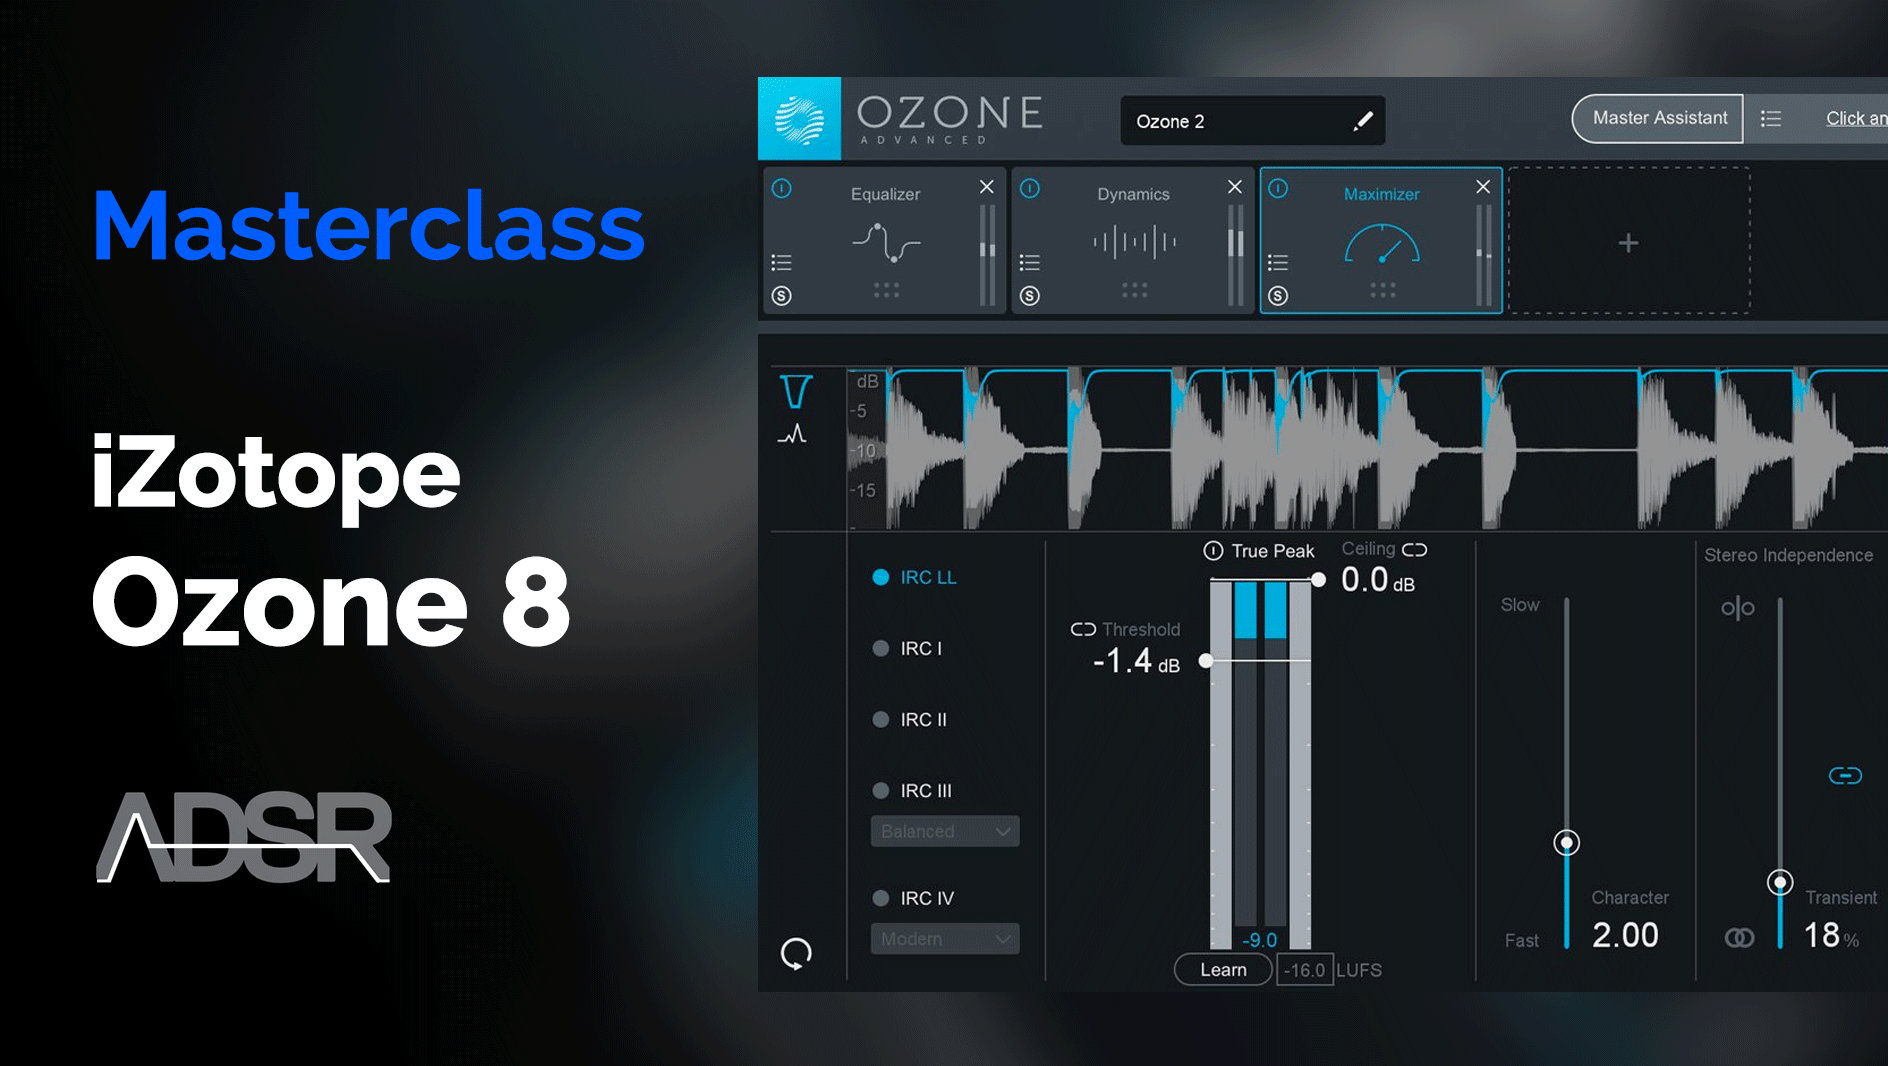 A Complete Guide to Achieving a Professional Master with Ozone 8 & Ozone 8 Advance